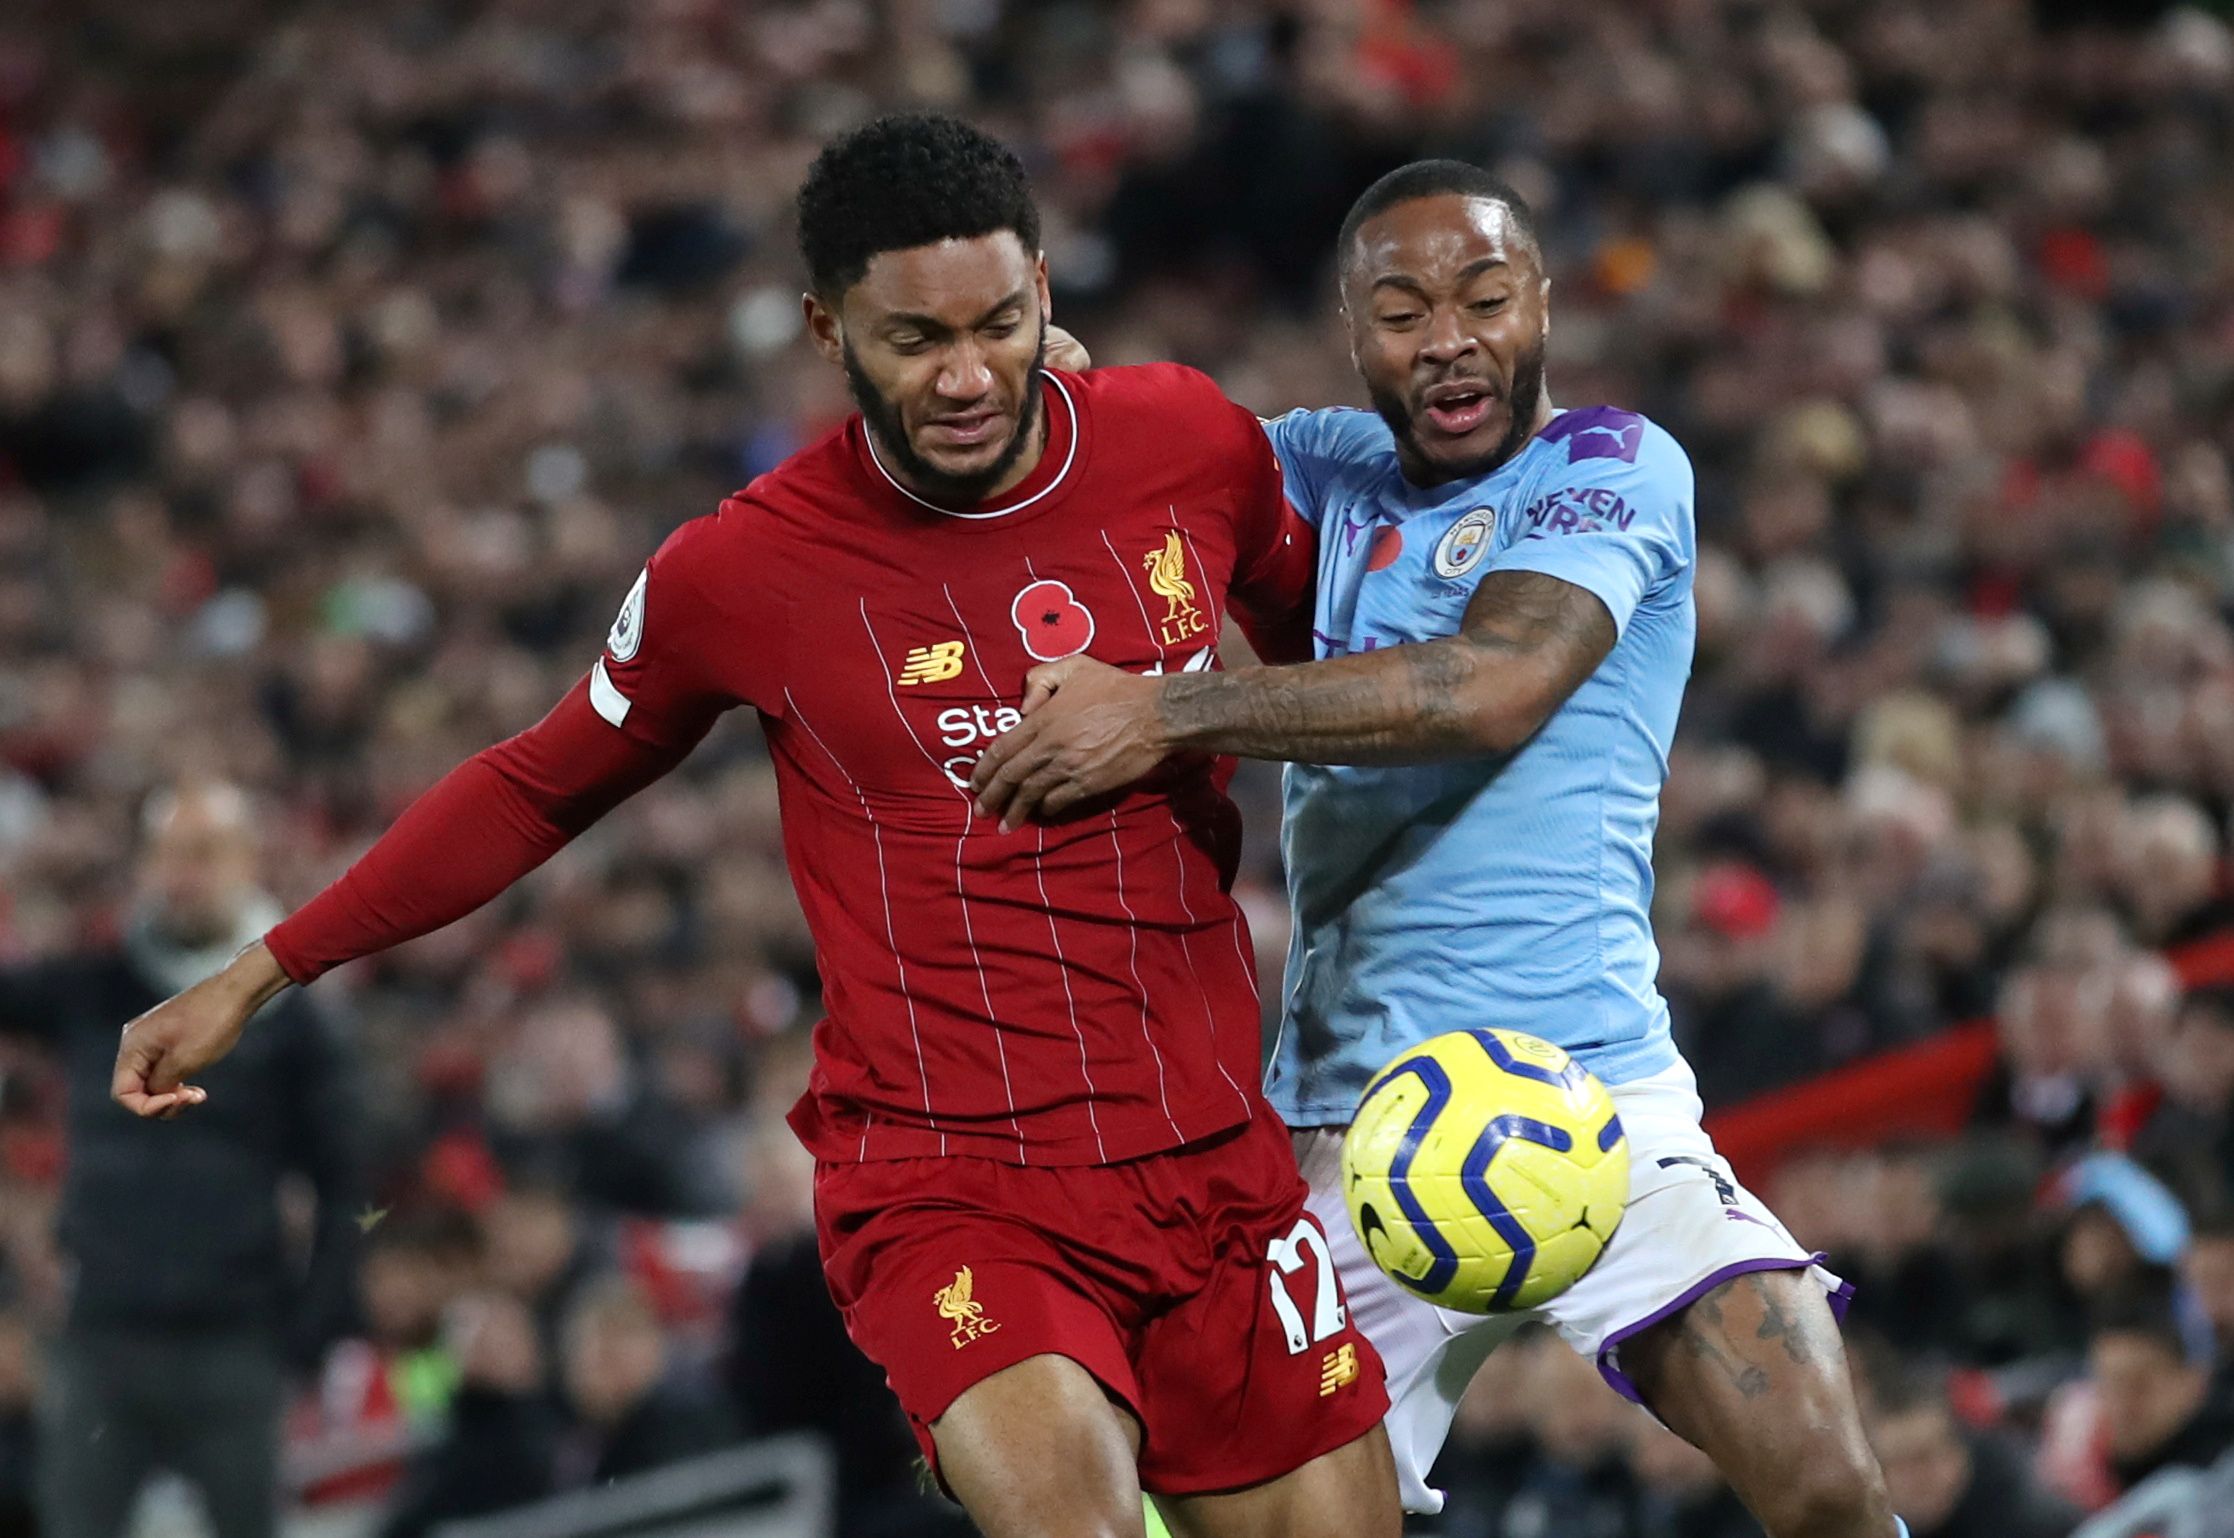 Soccer Football - Premier League - Liverpool v Manchester City - Anfield, Liverpool, Britain - November 10, 2019. Picture taken on November 10, 2019   Liverpool's Joe Gomez in action with Manchester City's Raheem Sterling  Action Images via Reuters/Carl Recine    EDITORIAL USE ONLY. No use with unauthorized audio, video, data, fixture lists, club/league logos or "live" services. Online in-match use limited to 75 images, no video emulation. No use in betting, games or single club/league/player pu